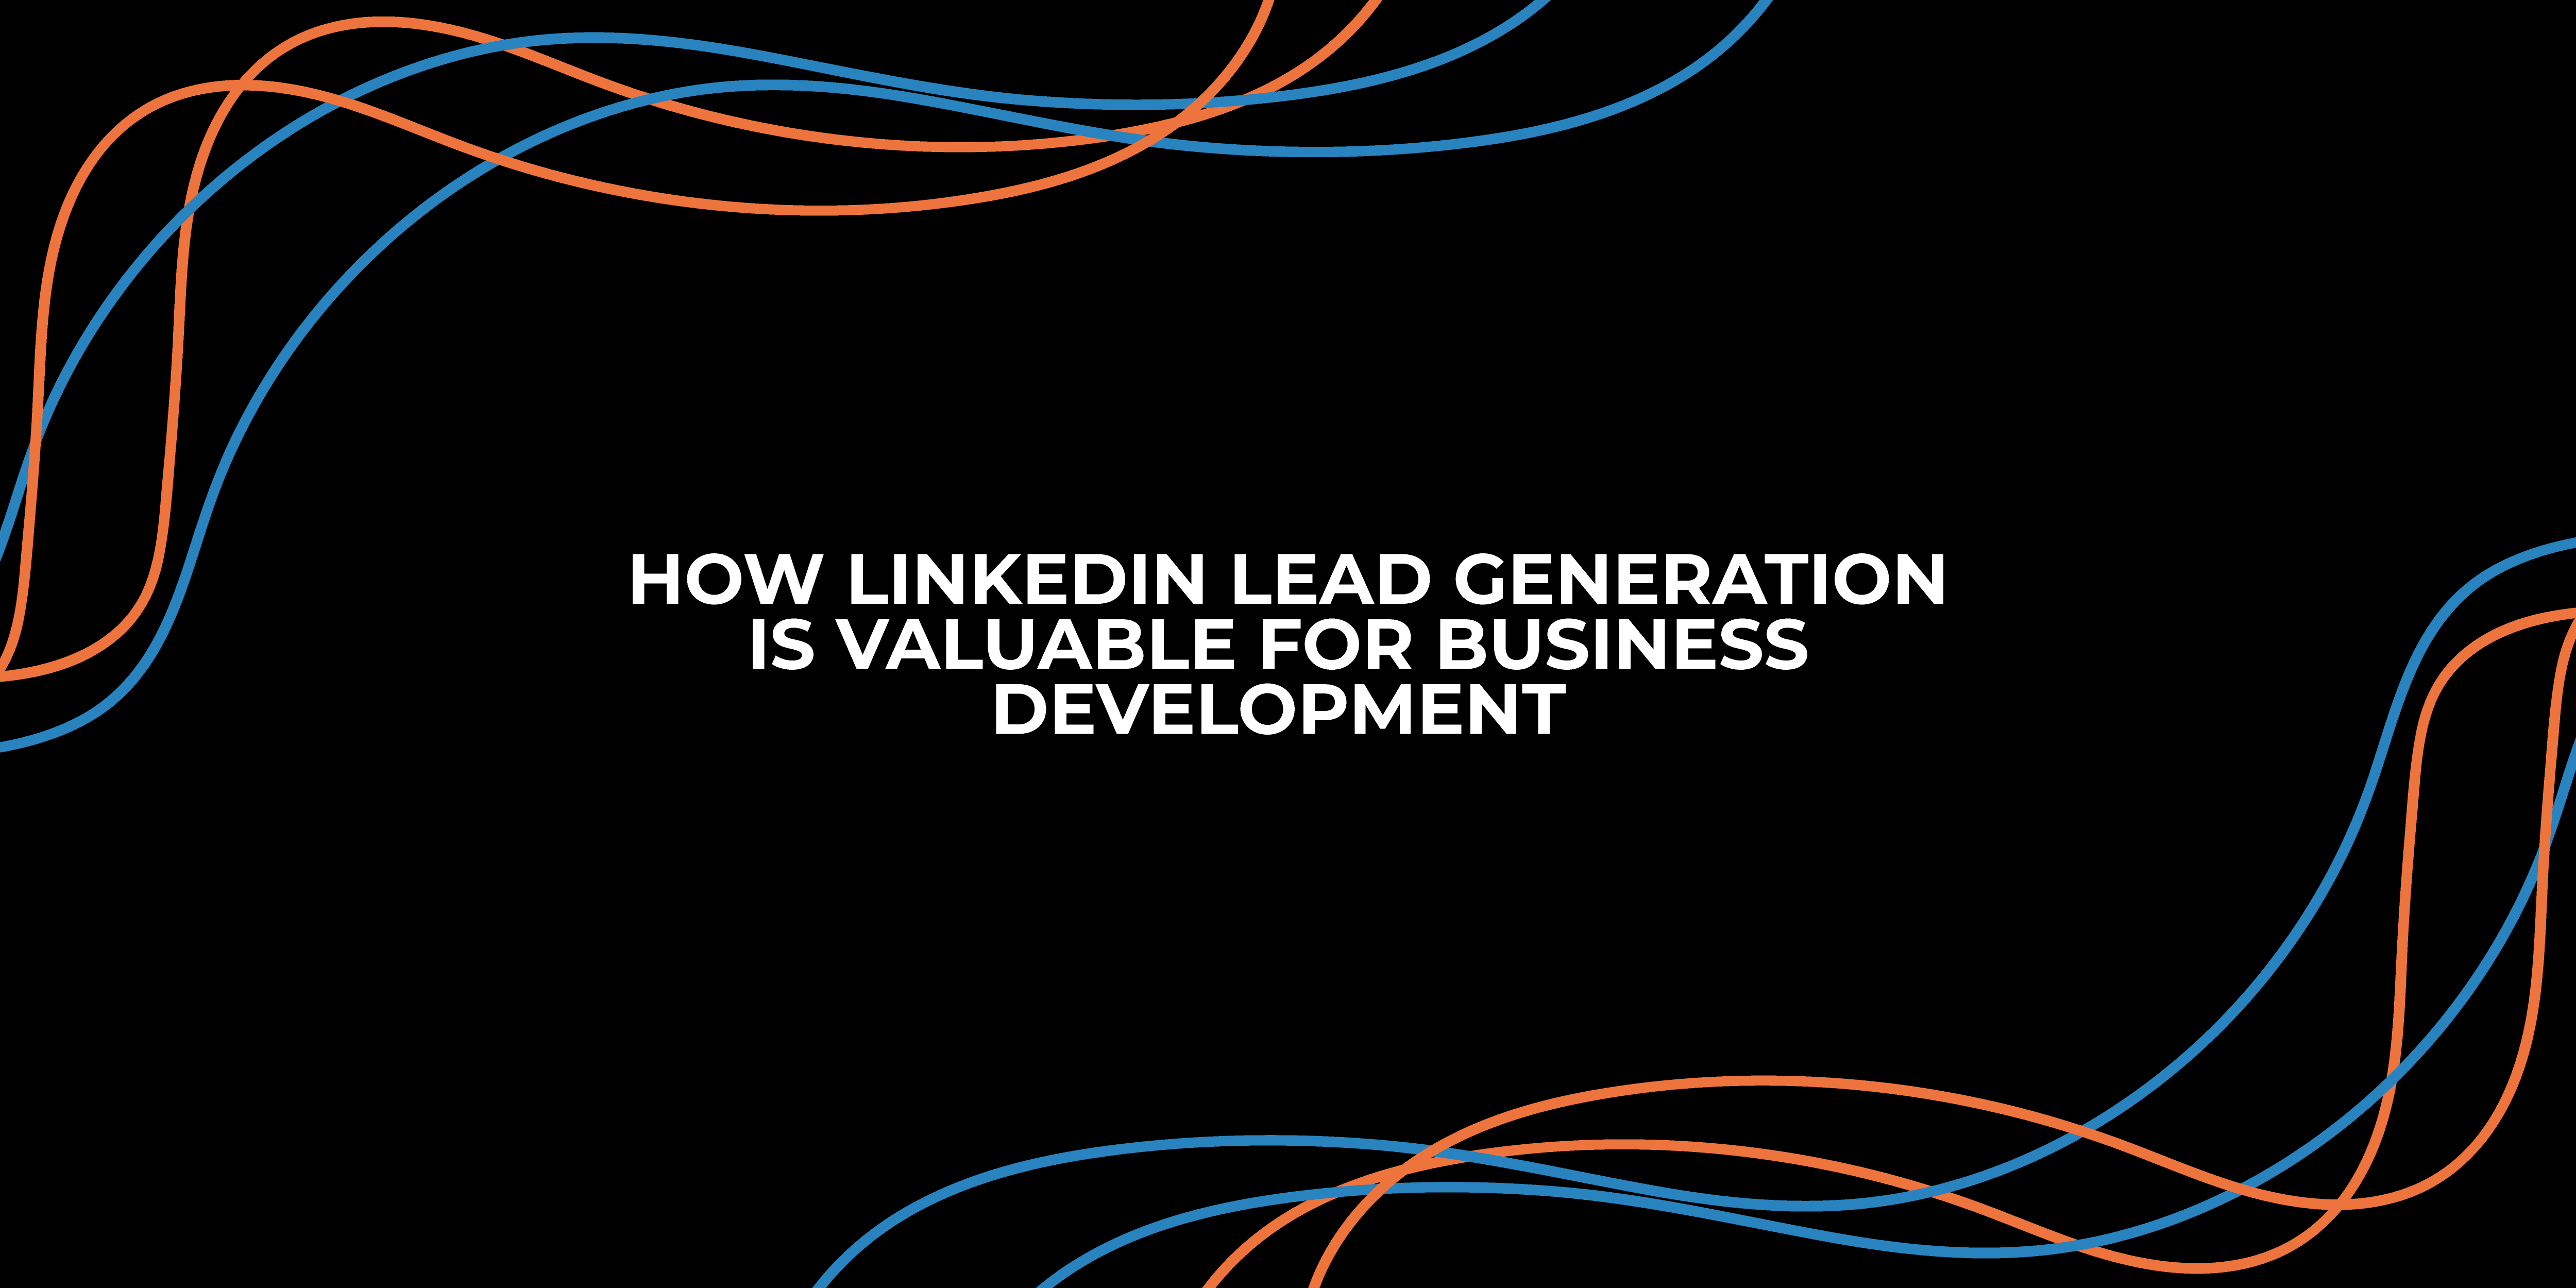 HOW LINKEDIN LEAD GENERATION IS VALUABLE FOR BUSINESS DEVELOPMENT